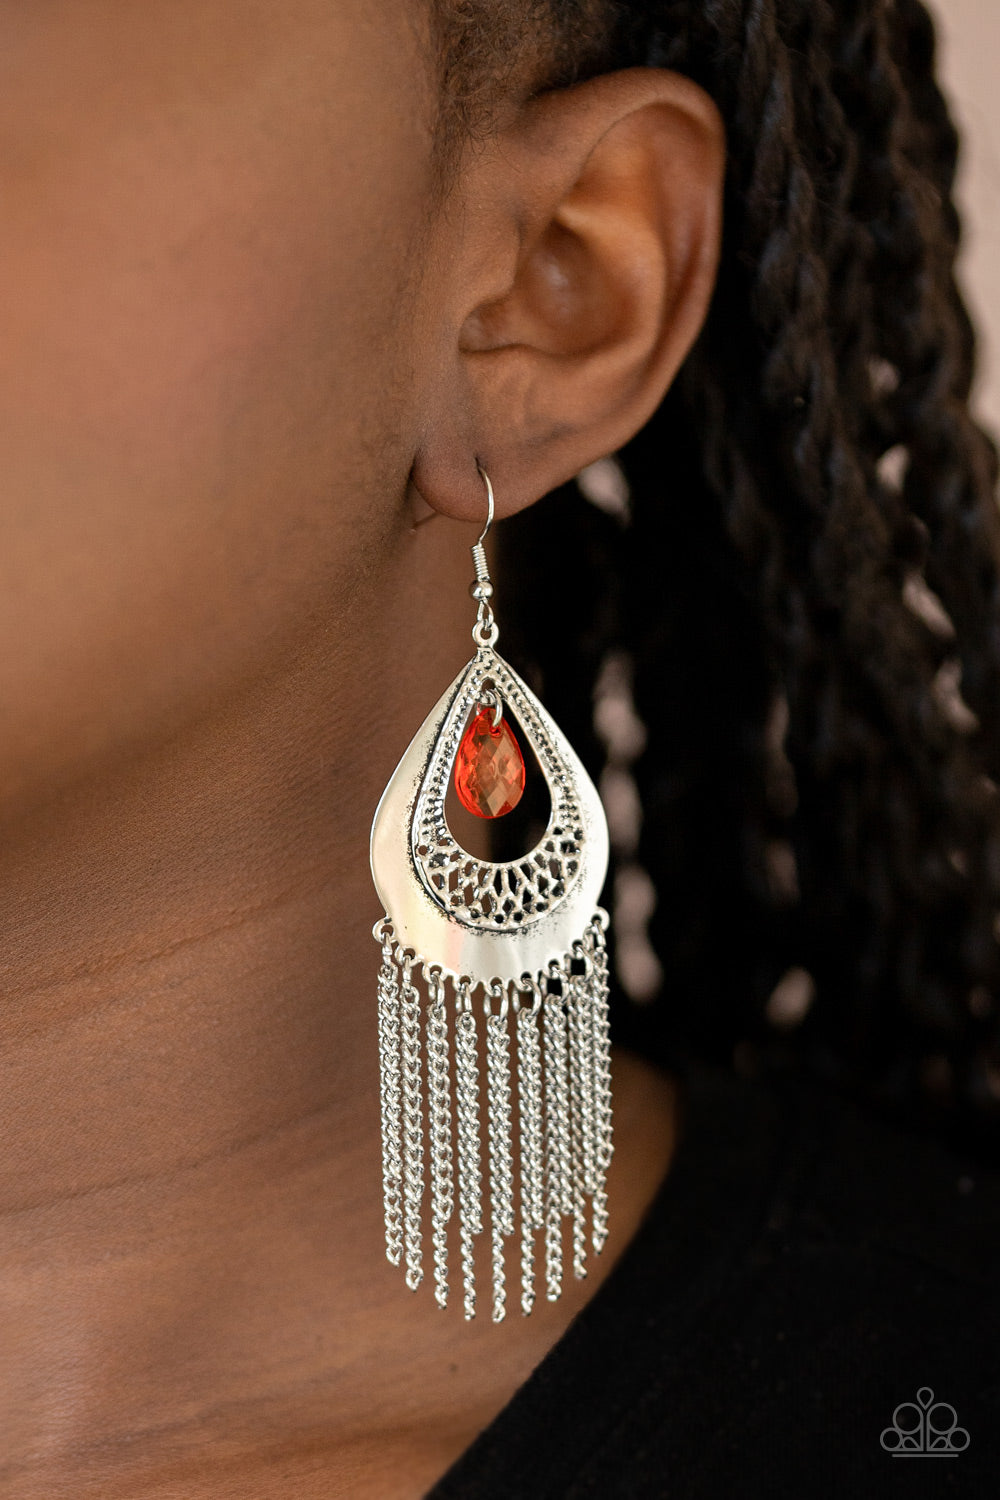 Scattered Storms - Red Earrings - Princess Glam Shop